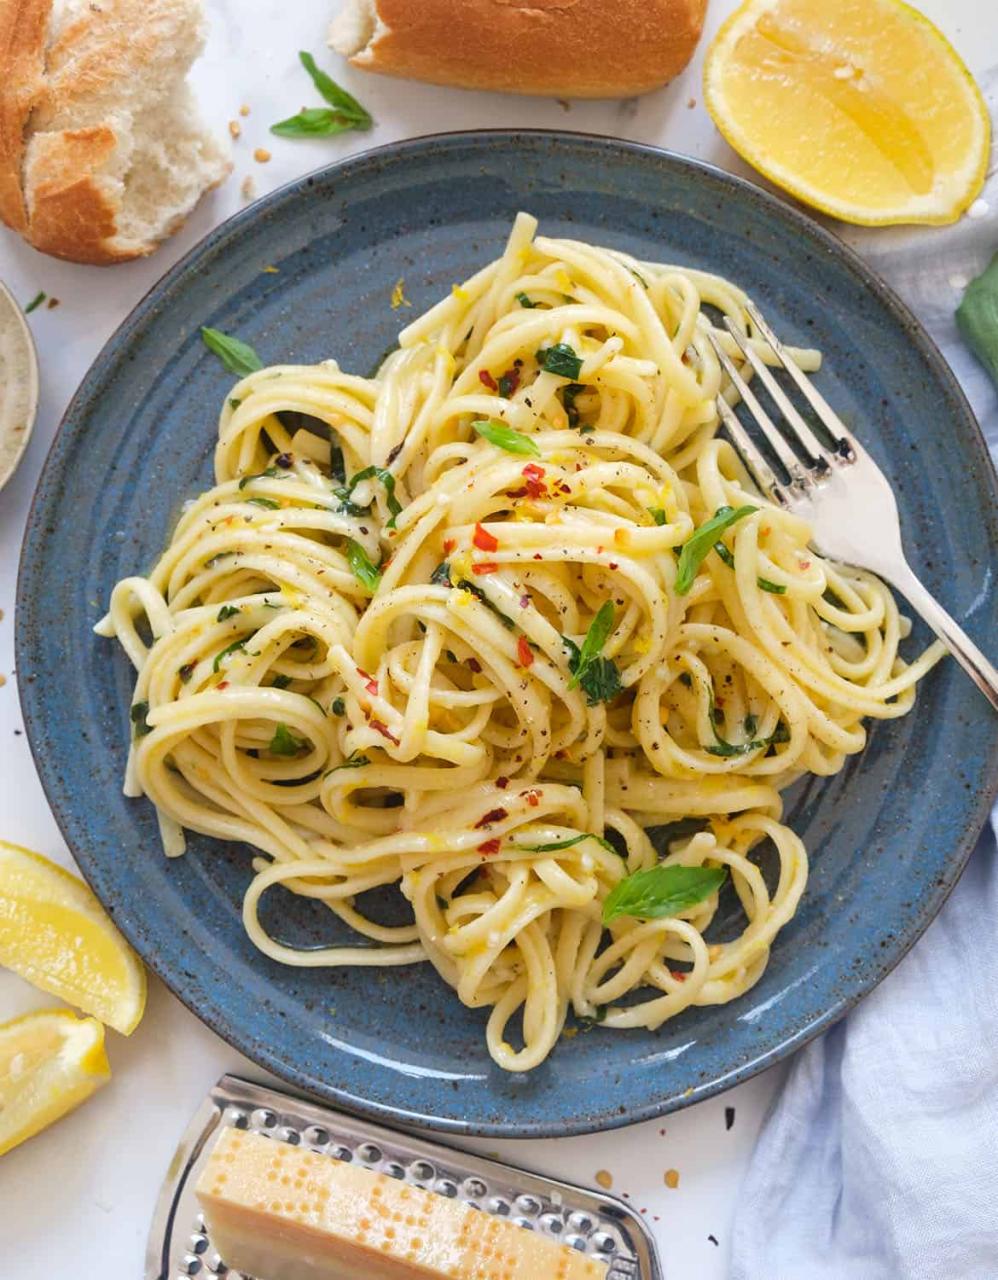 Lemon Garlic Pasta - The clever meal